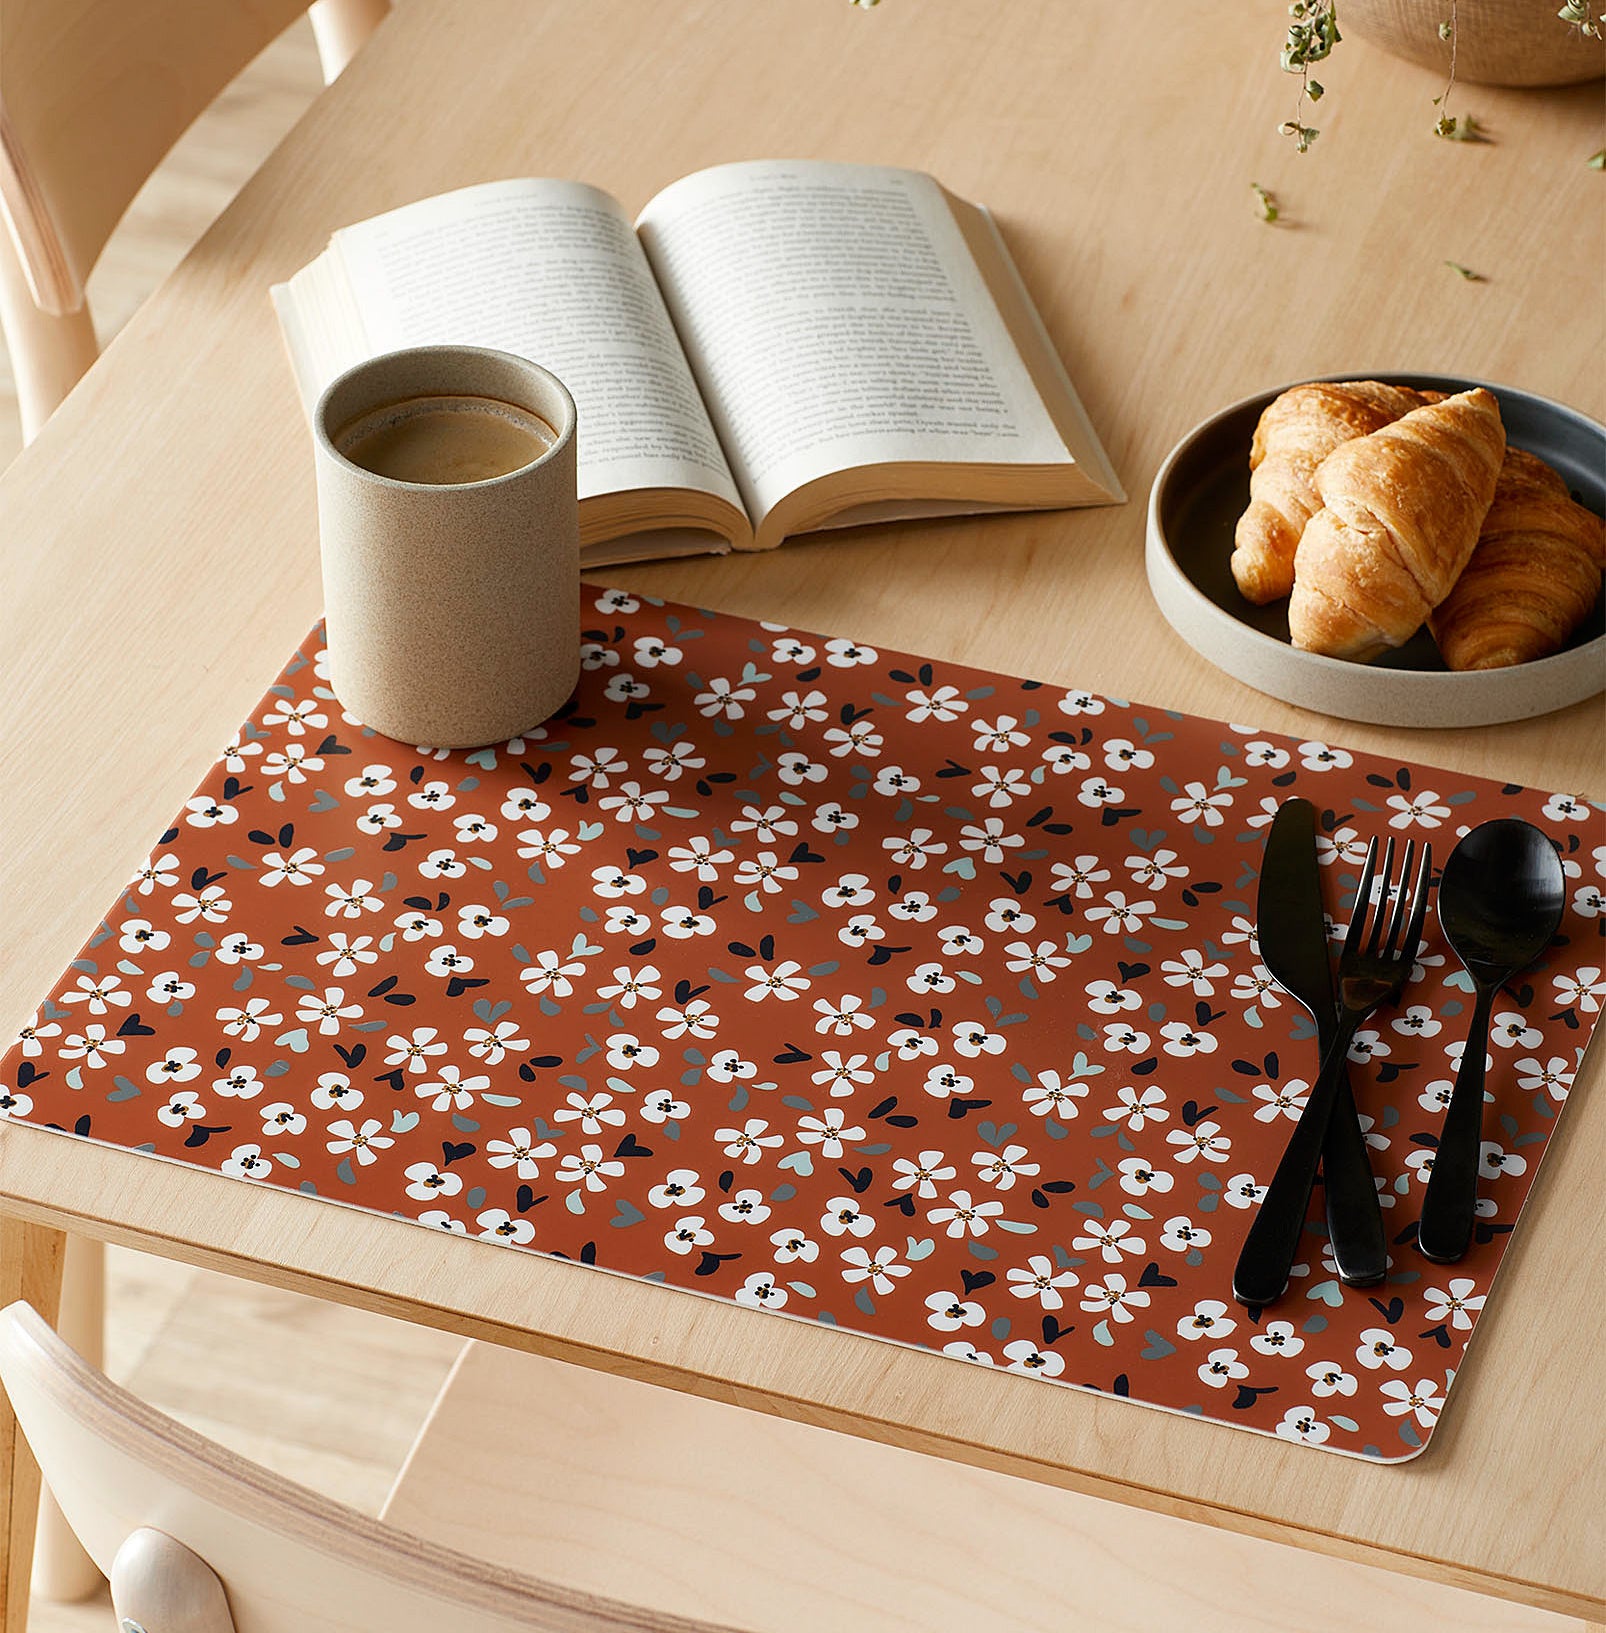 The floral placemat on a wooden table 